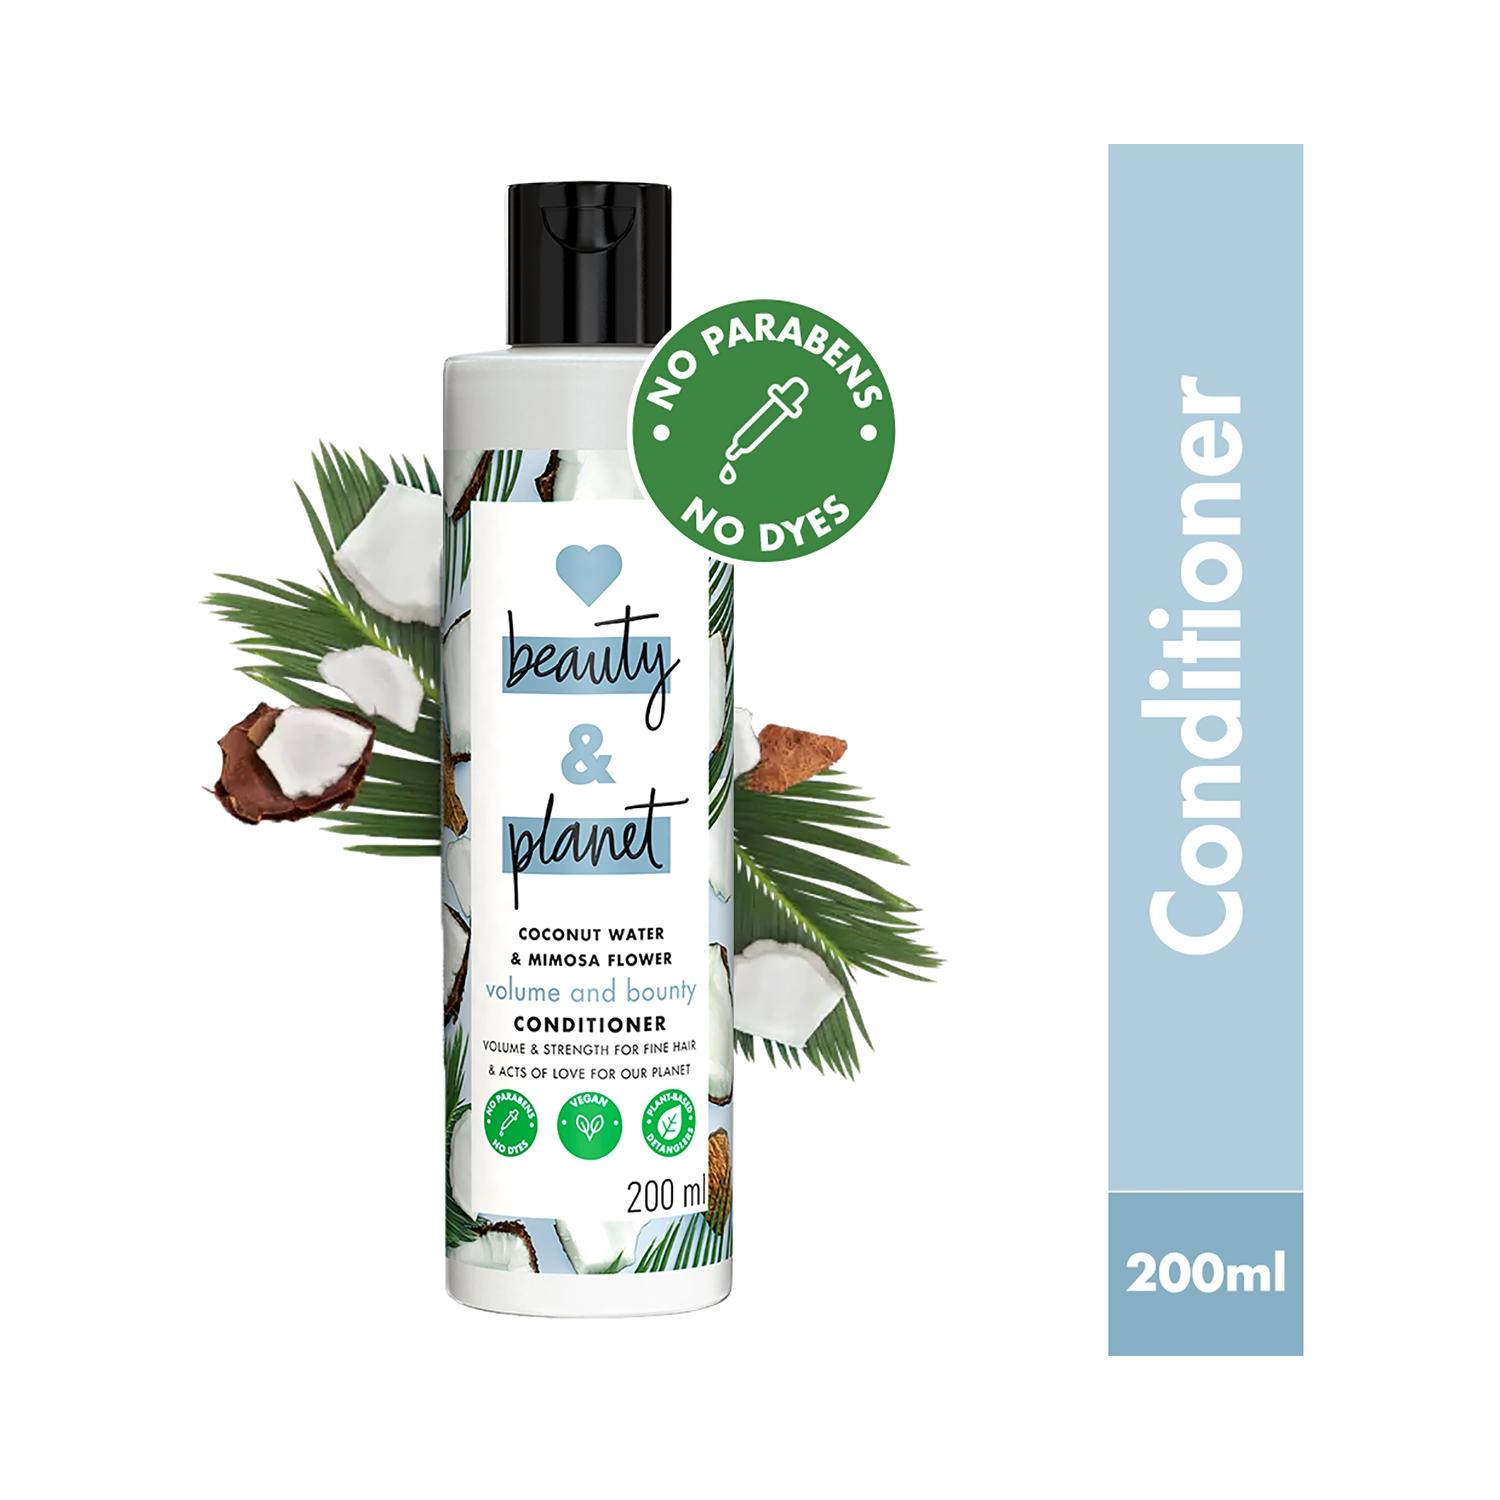 love beauty & planet coconut water and mimosa flower volume and bounty conditioner (200ml)